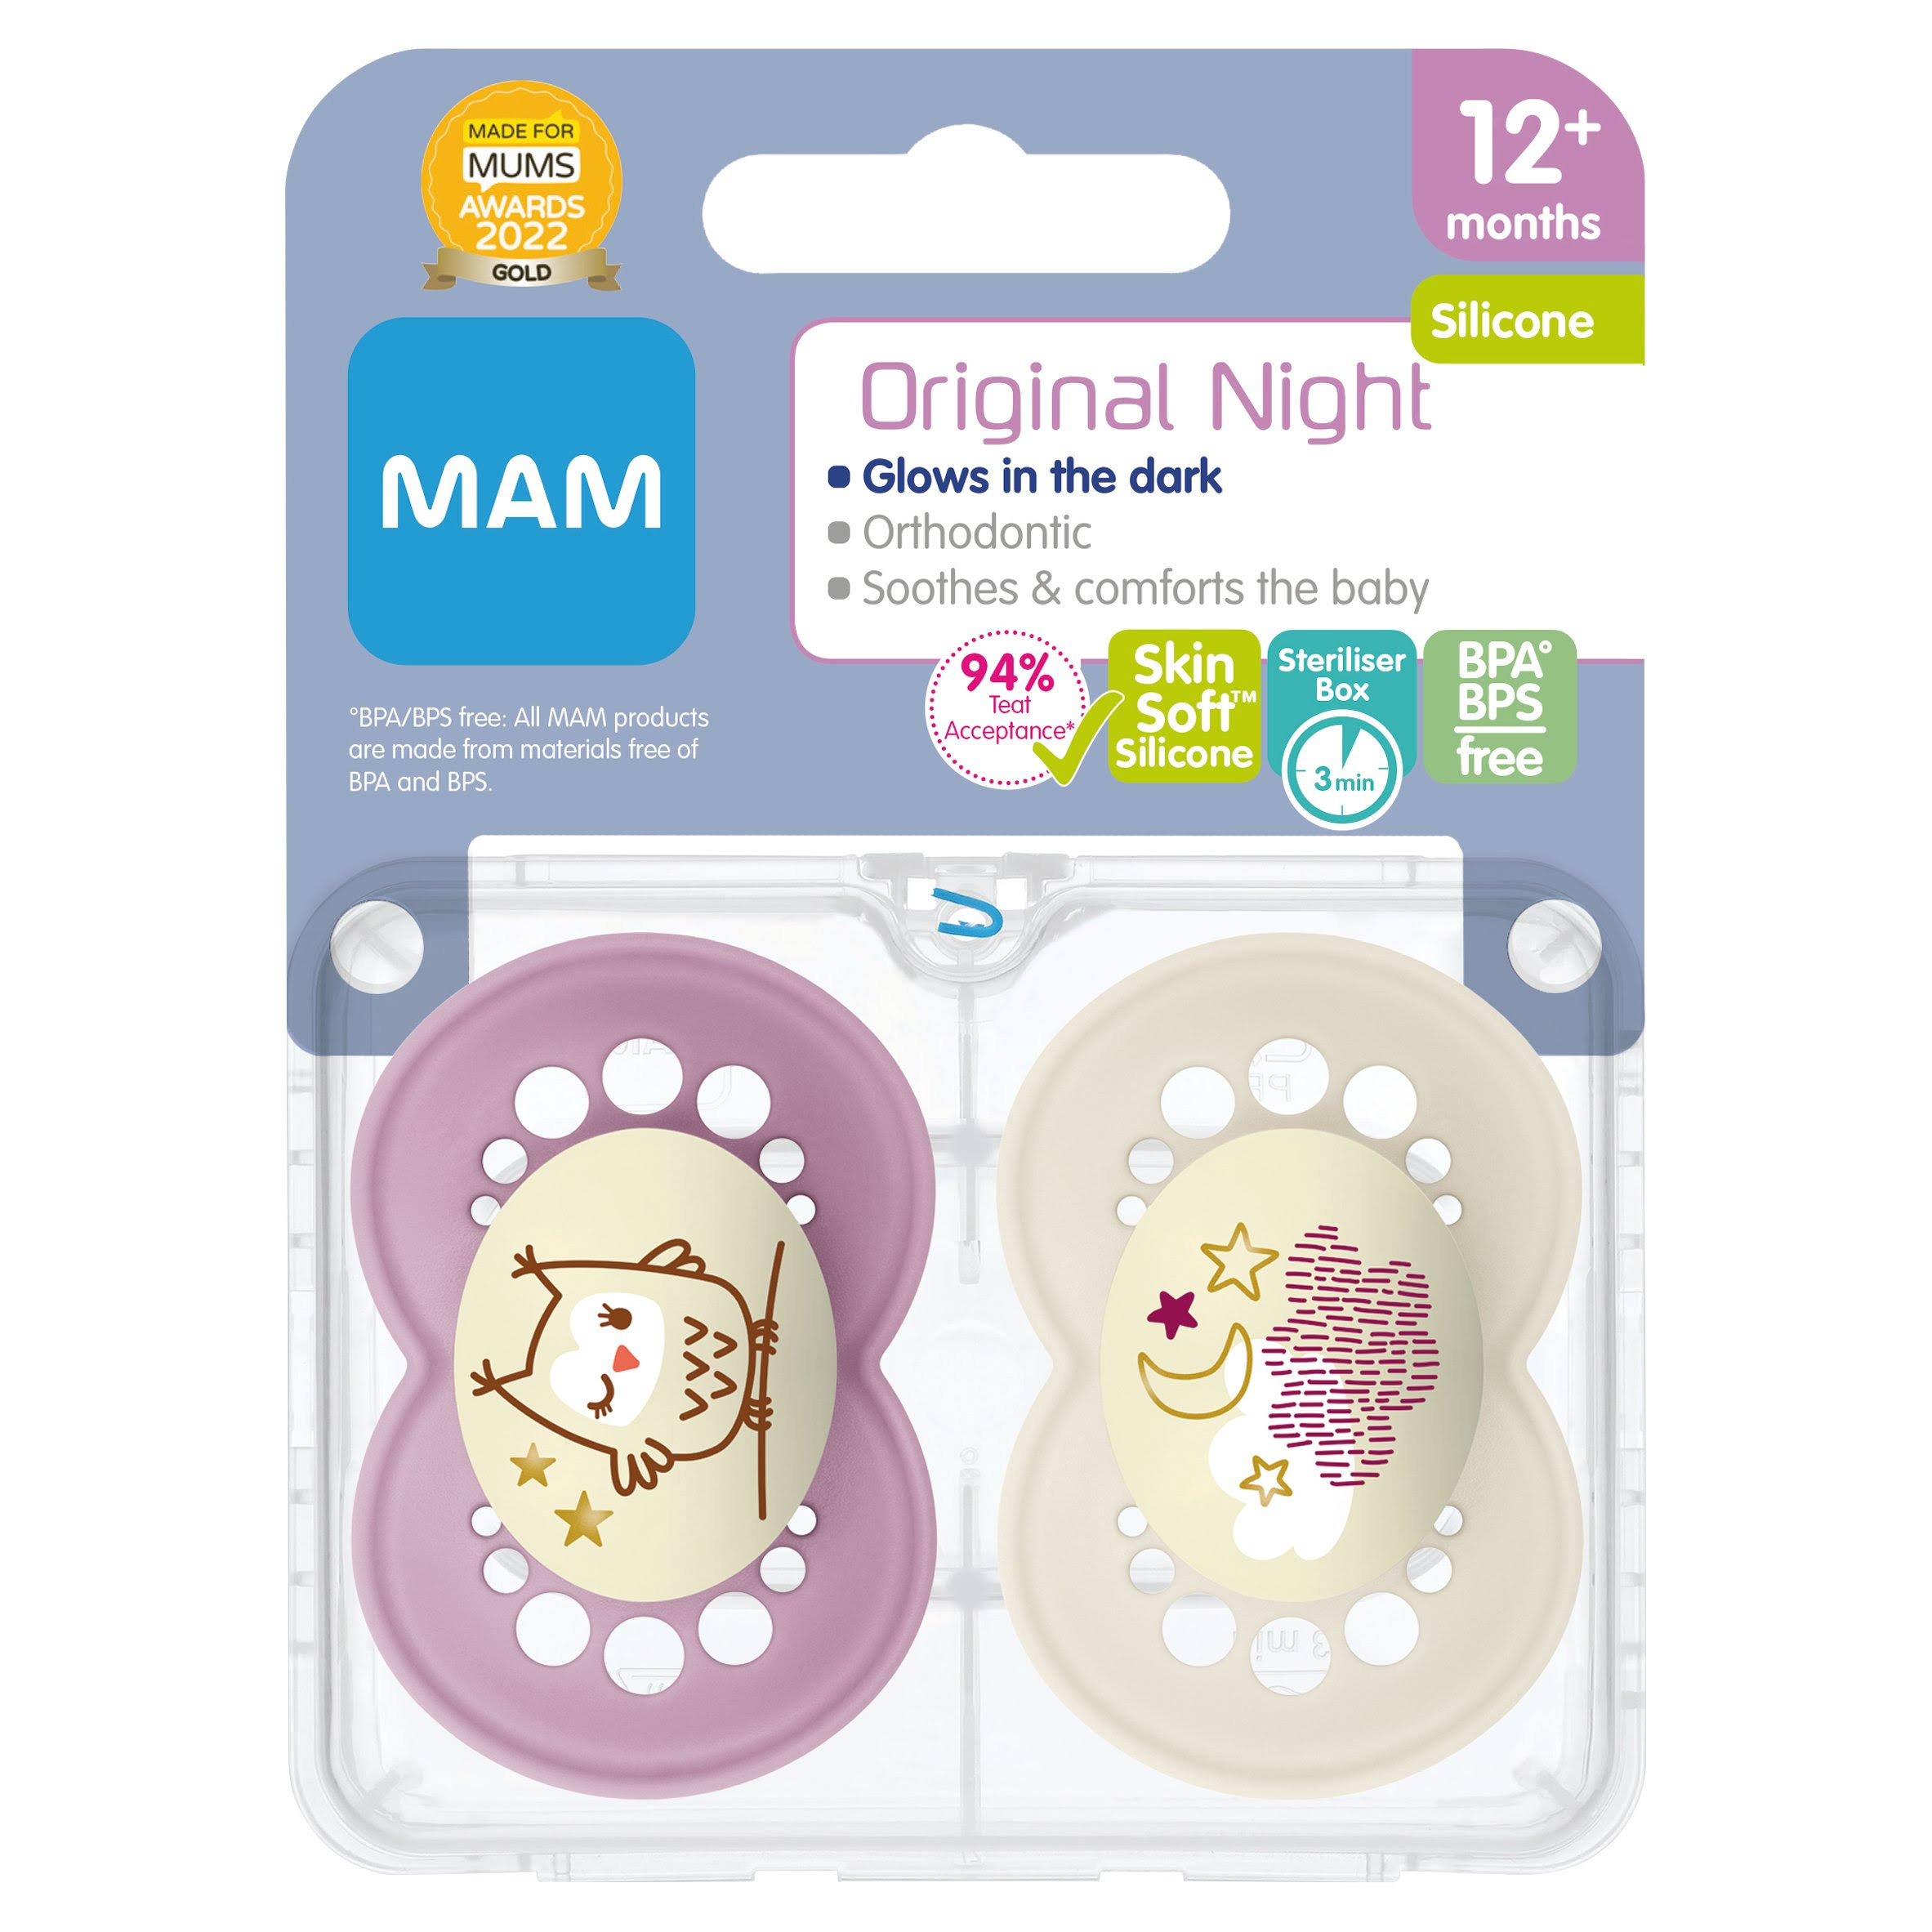 MAM Original Night Silicone Soothers - 12+ Months